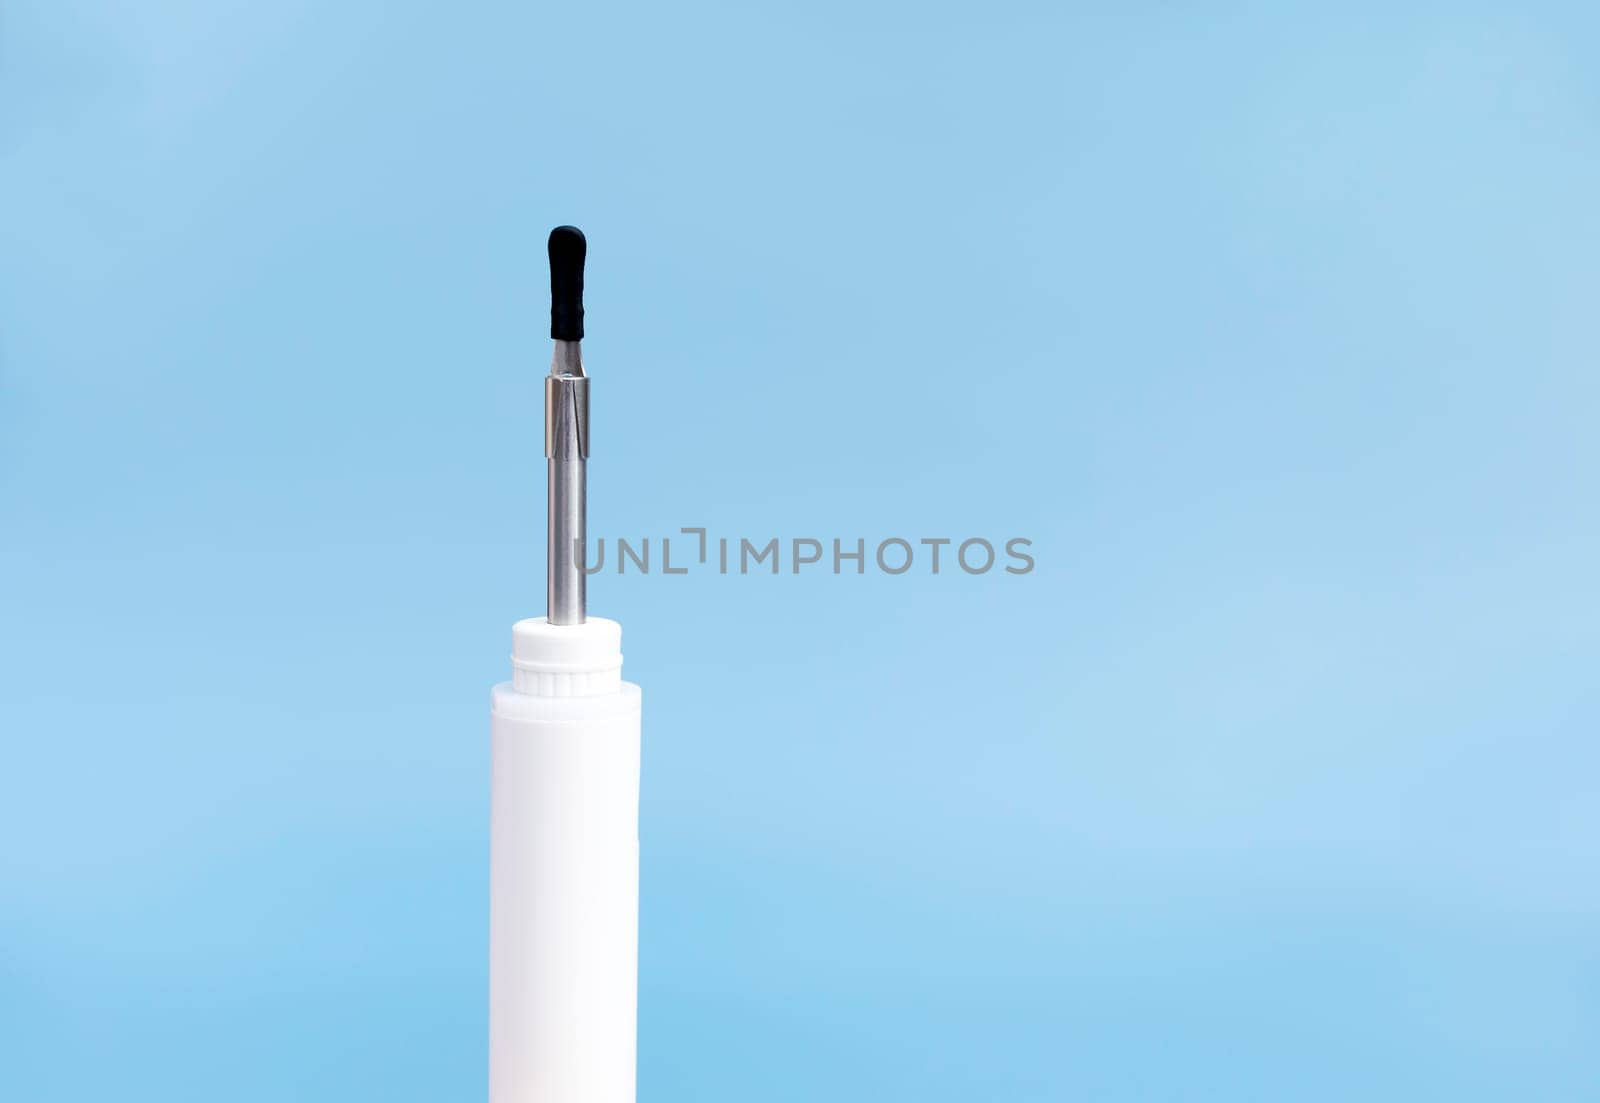 Mockup Closeup Ear Scope For Wax Removal Tool. Digital Otoscope, Earwax Cleaner With Gyroscope, Camera, Light. Cleaning Ears Device Connected to Smartphone. Ear Cleaning Technology. Copy Space.